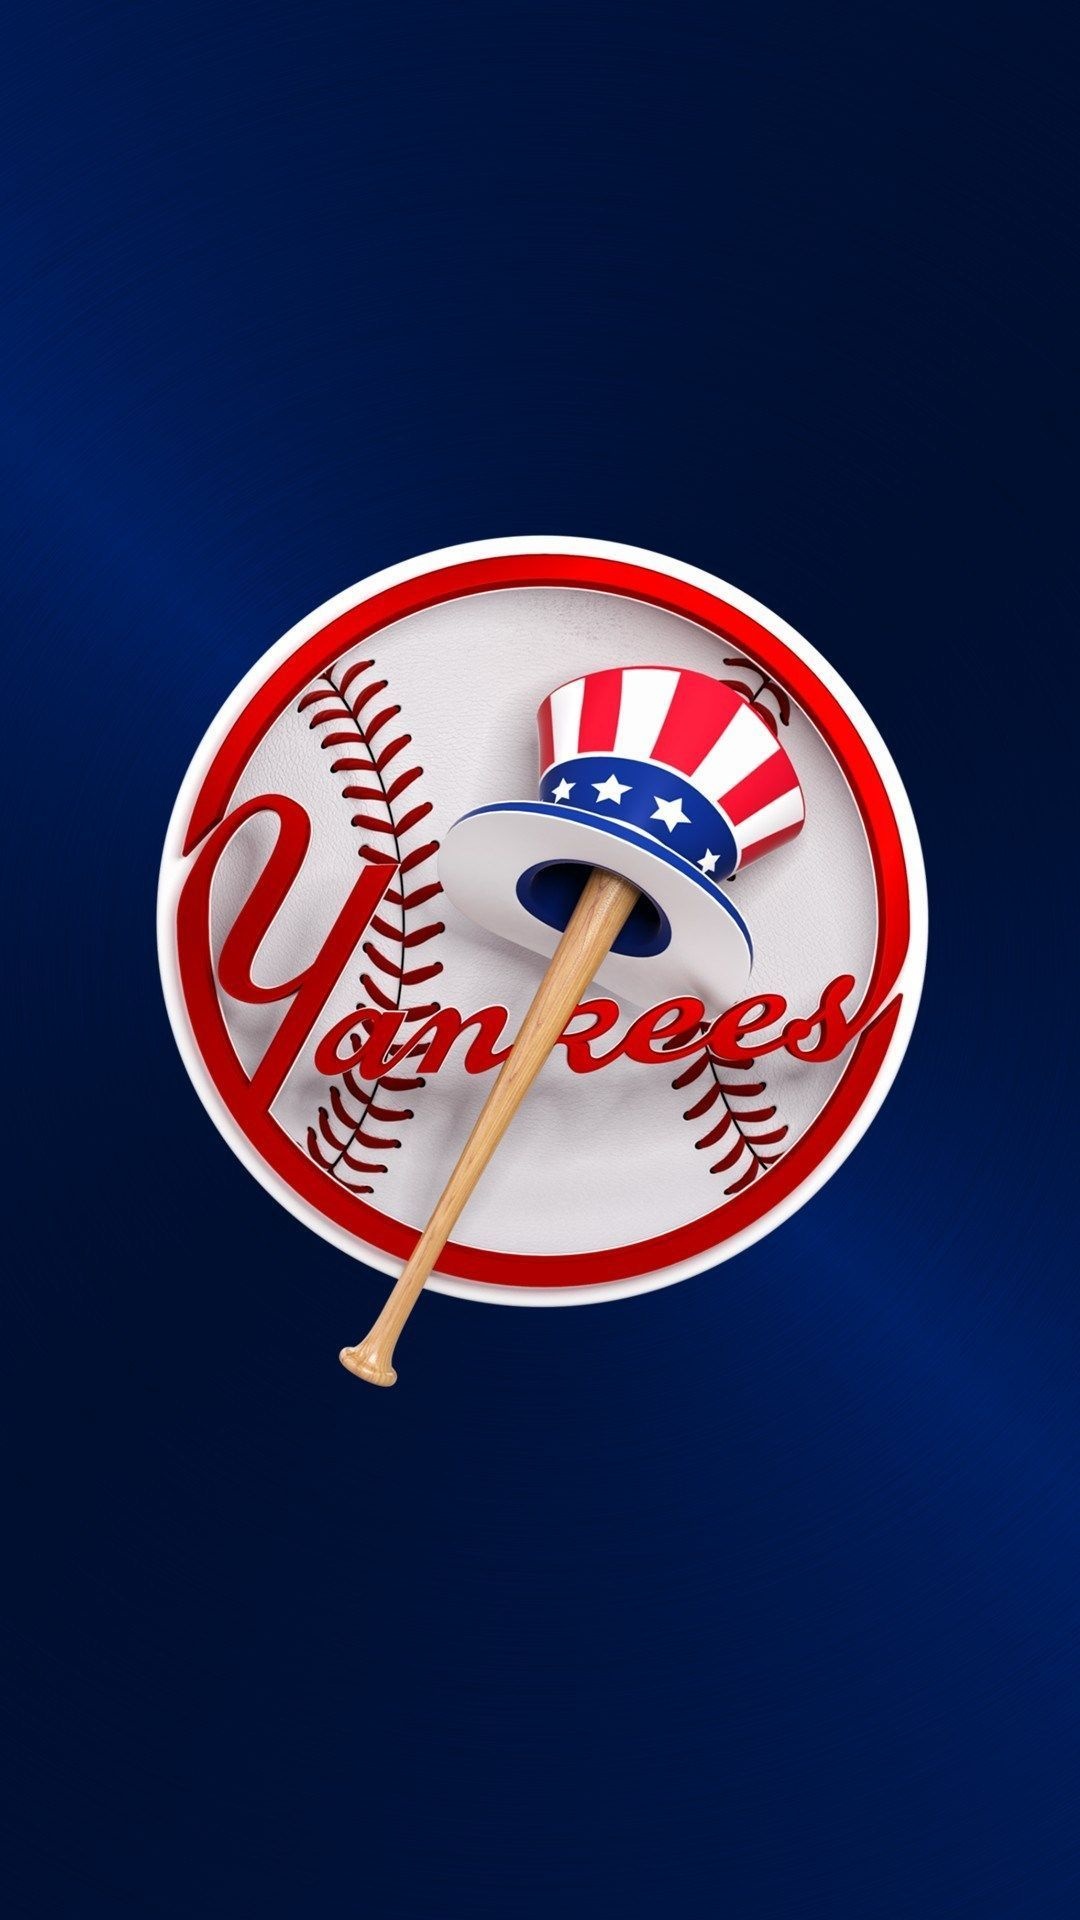 New York Yankees: The National Baseball Hall of Fame features a total of 44 Yankees' players and 11 managers. 1080x1920 Full HD Background.